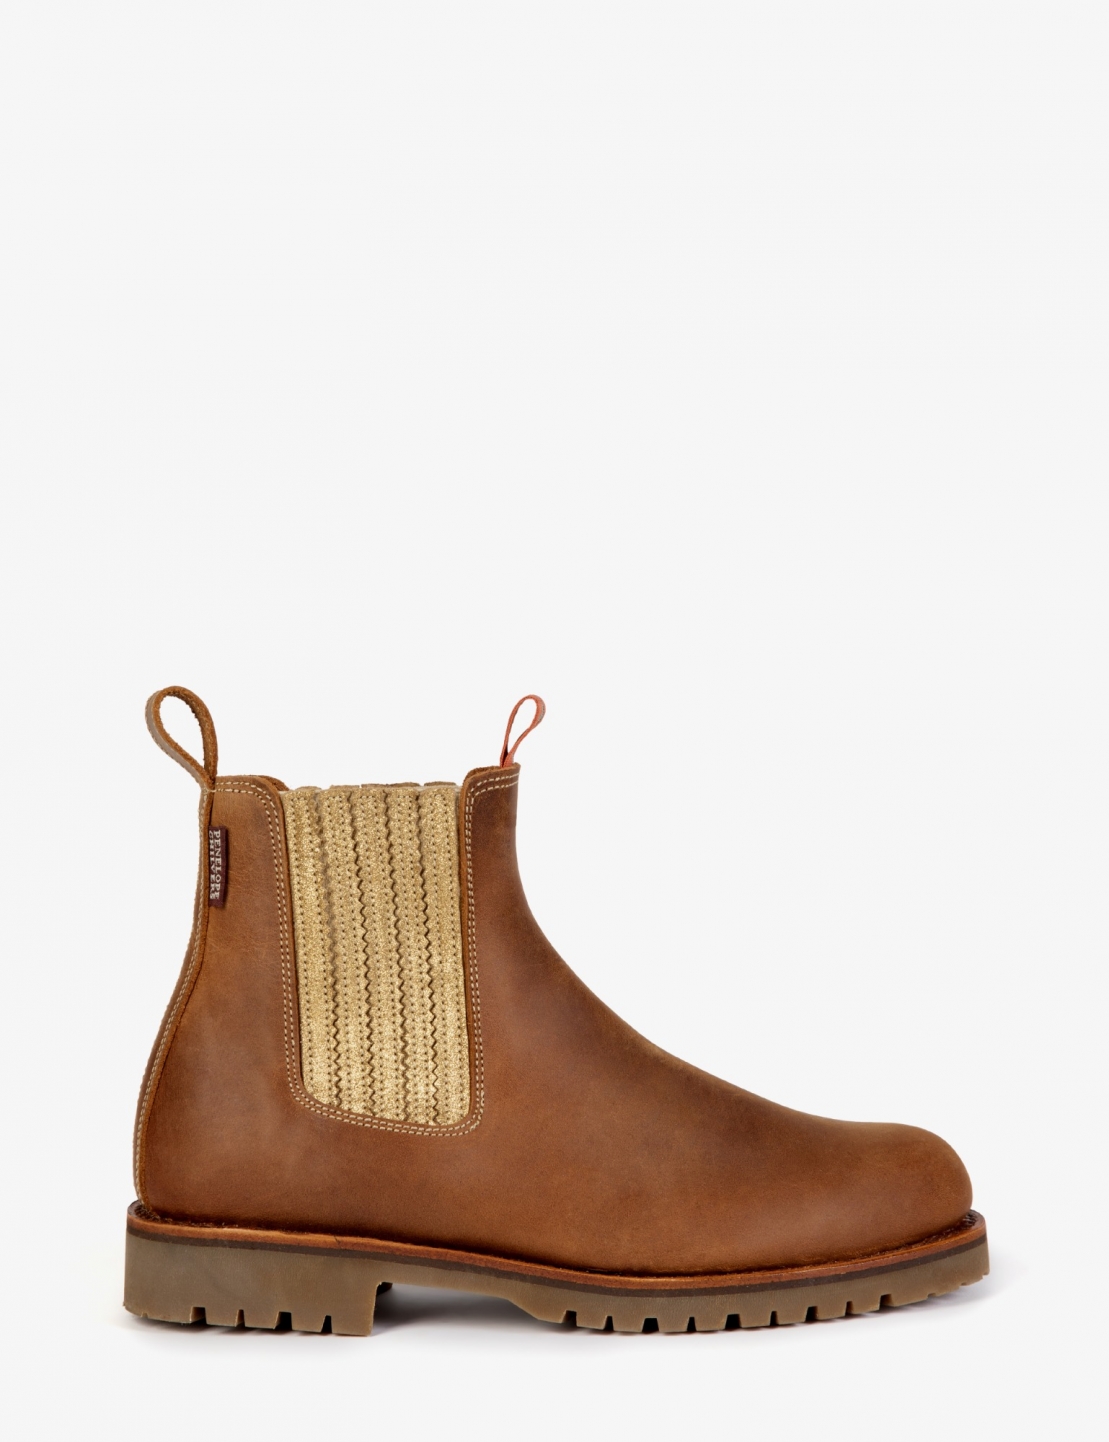 Oscar Leather Boot - Tan/Gold | Penelope Chilvers